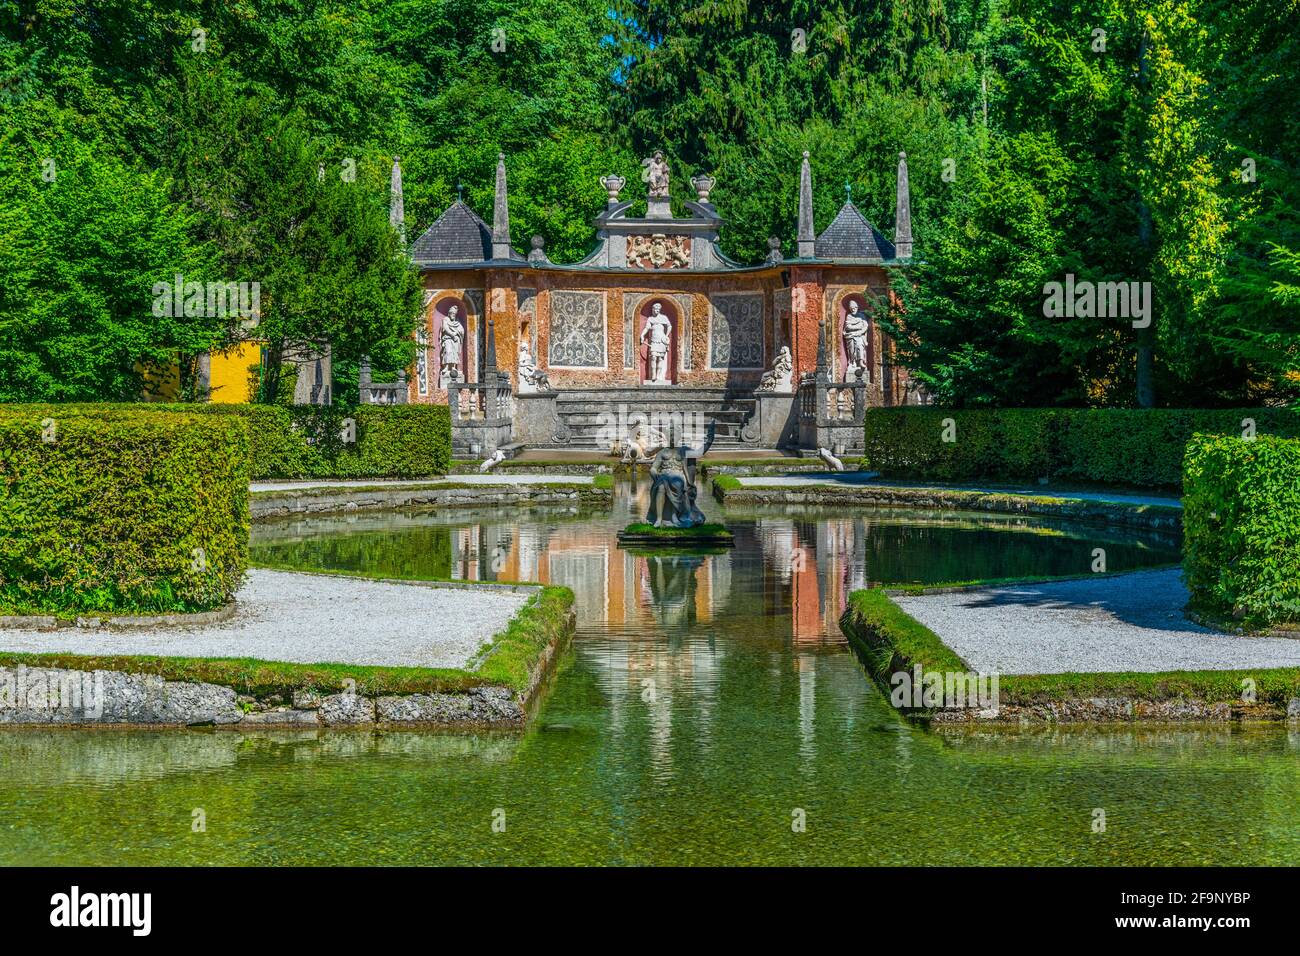 View of a trick fountain situated in a public park near the Hellbrunn Palace, Salzburg, Austria. Stock Photo